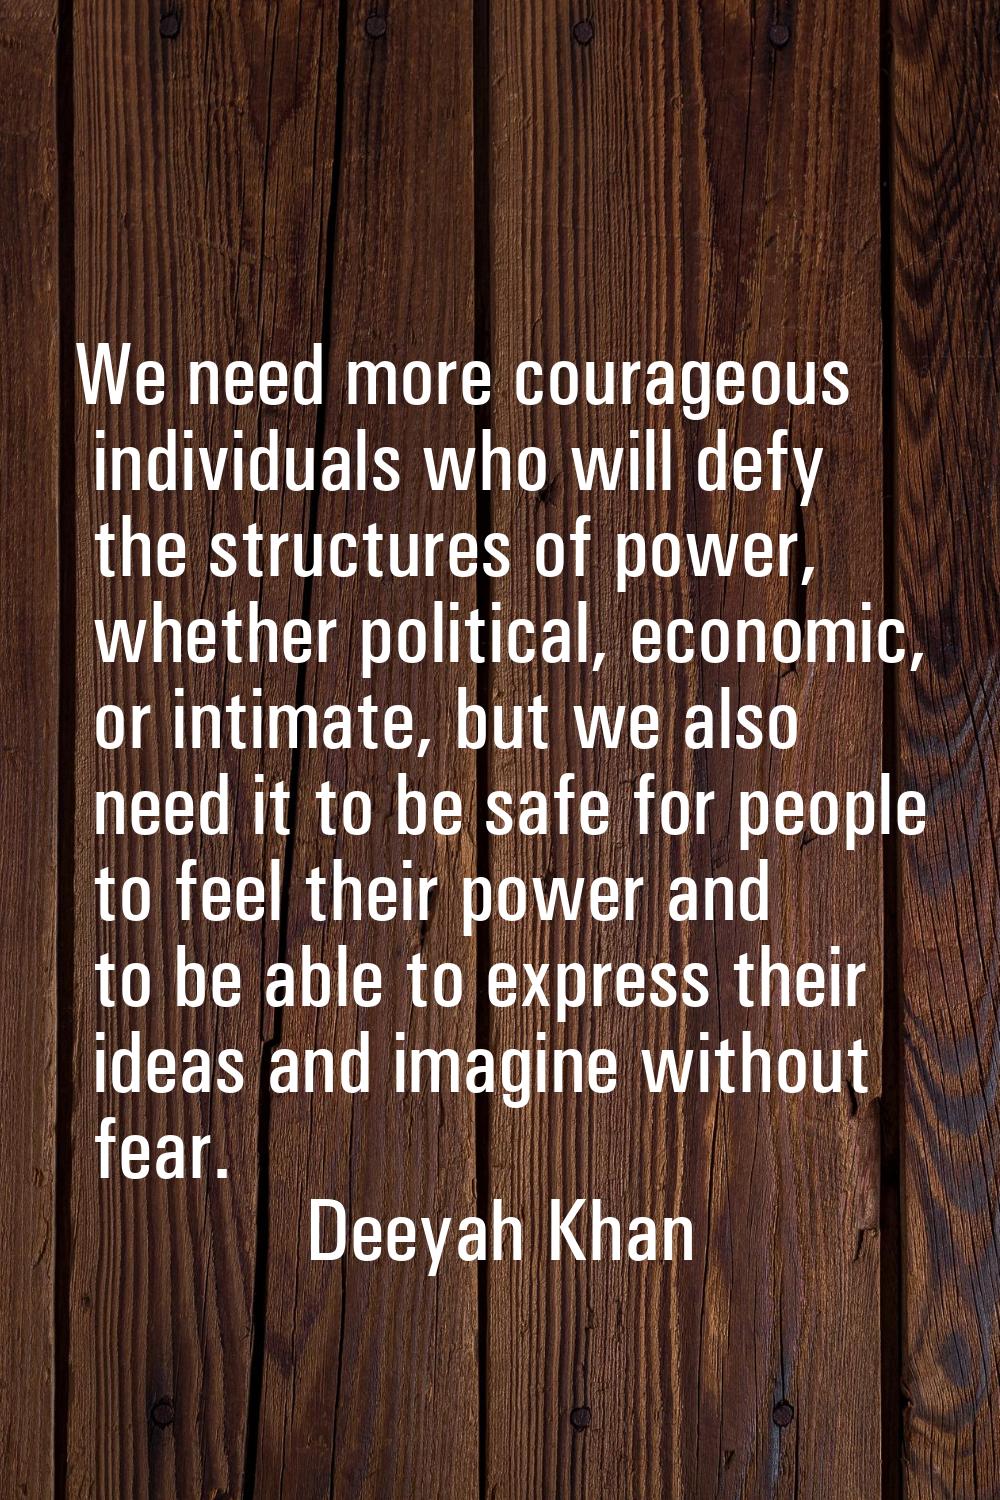 We need more courageous individuals who will defy the structures of power, whether political, econo